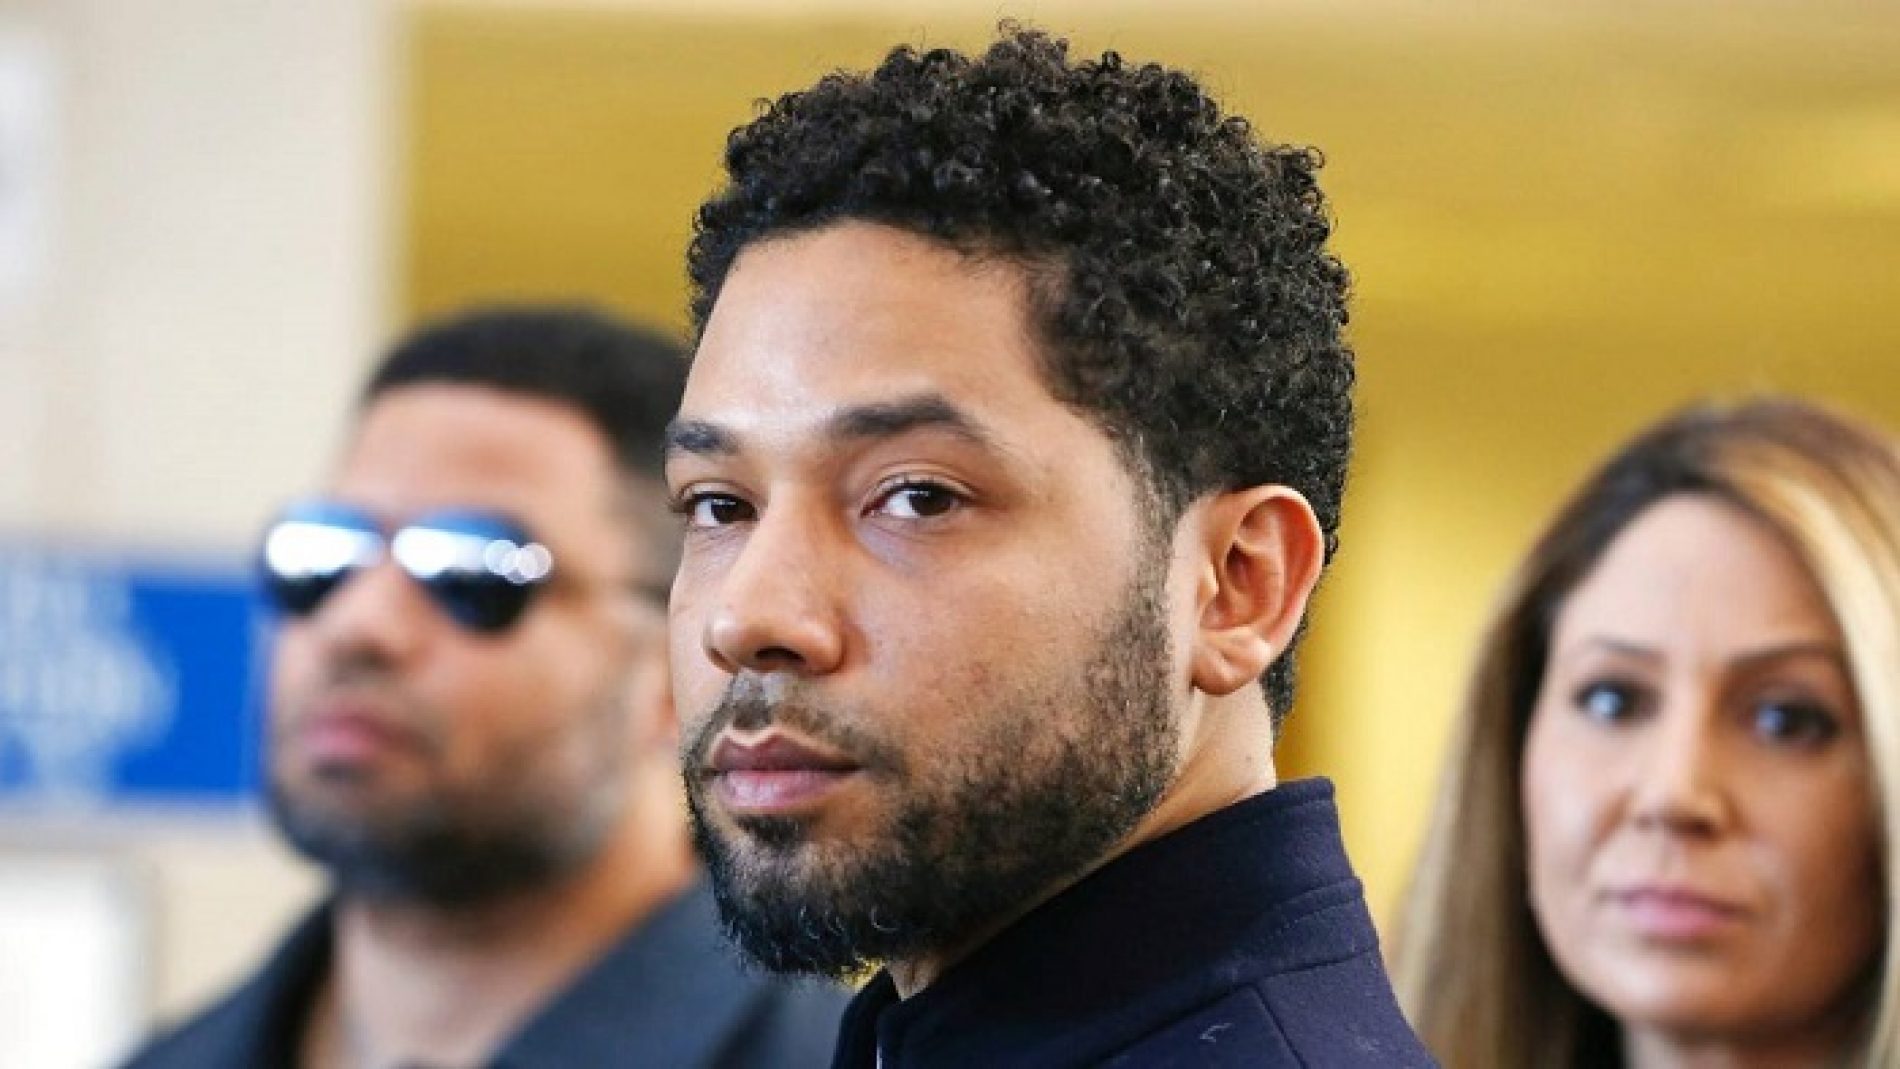 News of the charges against Jussie Smollett getting dropped draws a reaction of both outrage and relief